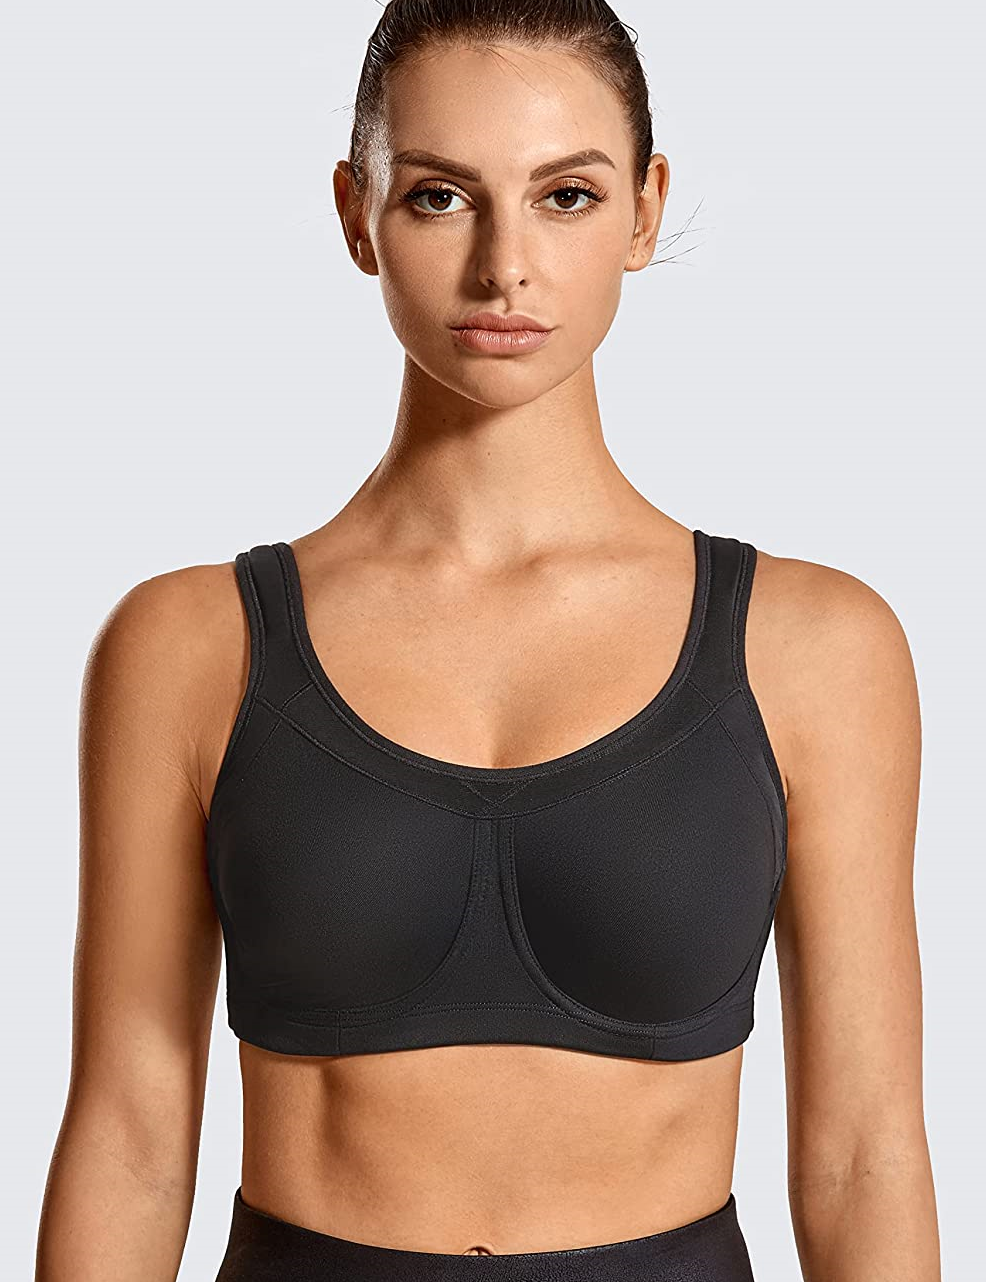 Sksloeg Ladies Bras Smooth U Underwire Full Coverage Bra, Full-Coverage  Bra, Smoothing T-Shirt Bra, Max Support Underwire with Bounce Control,Black